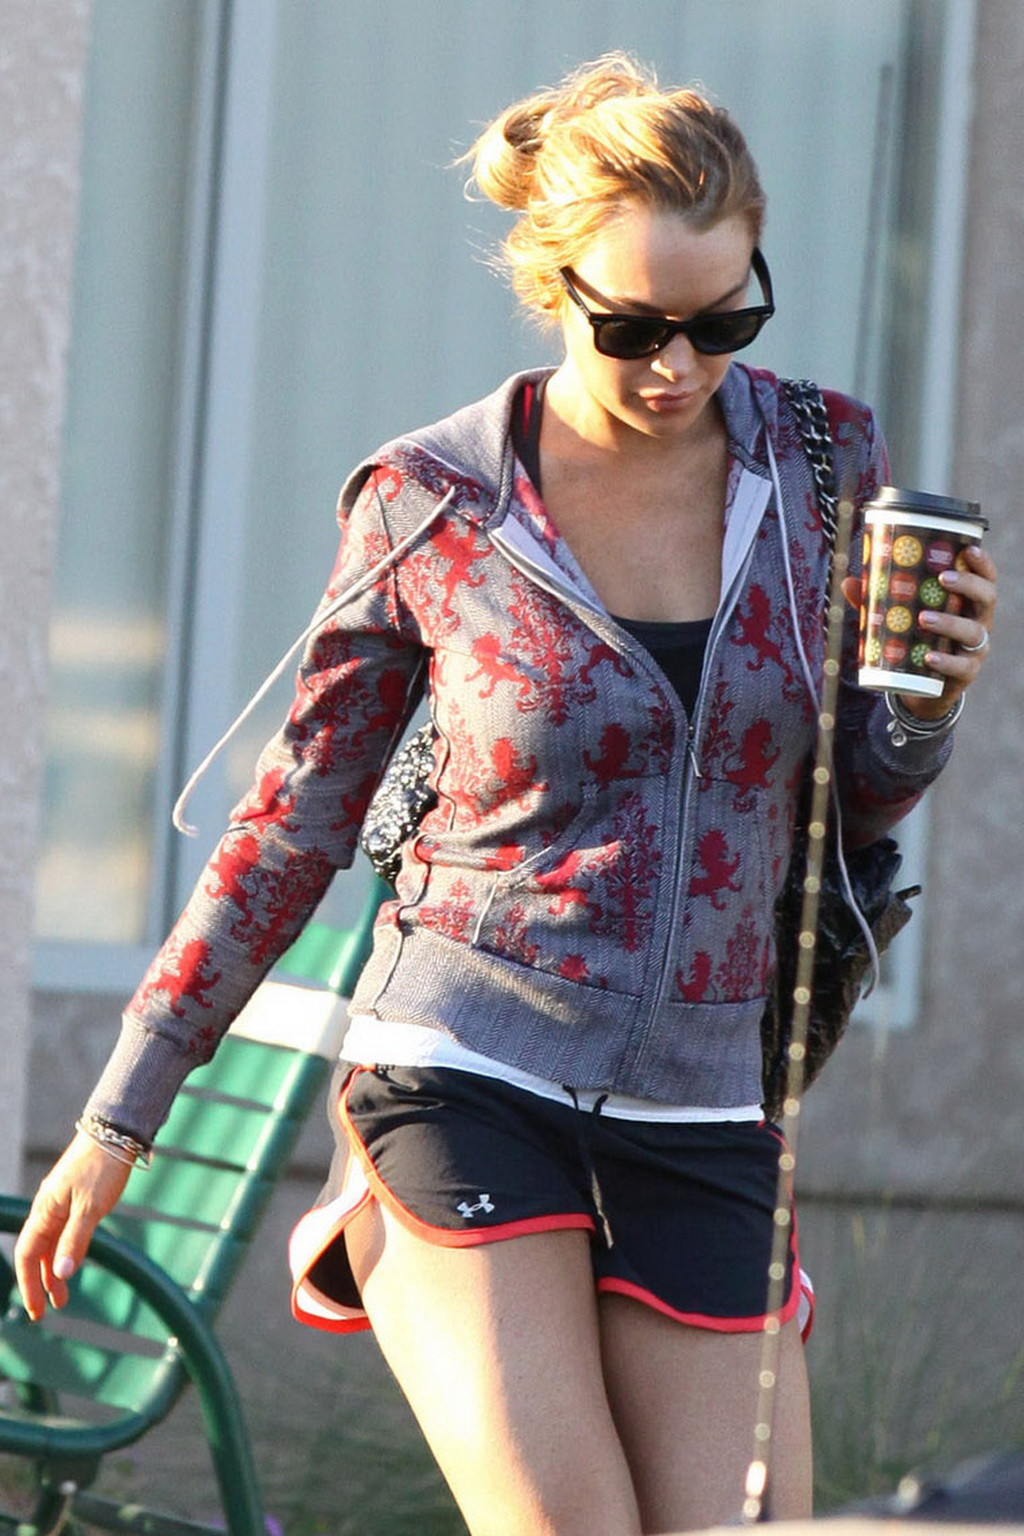 Lindsay Lohan leggy  cleavy wearing low cut top  denim shorts at the Betty Ford  #75326181